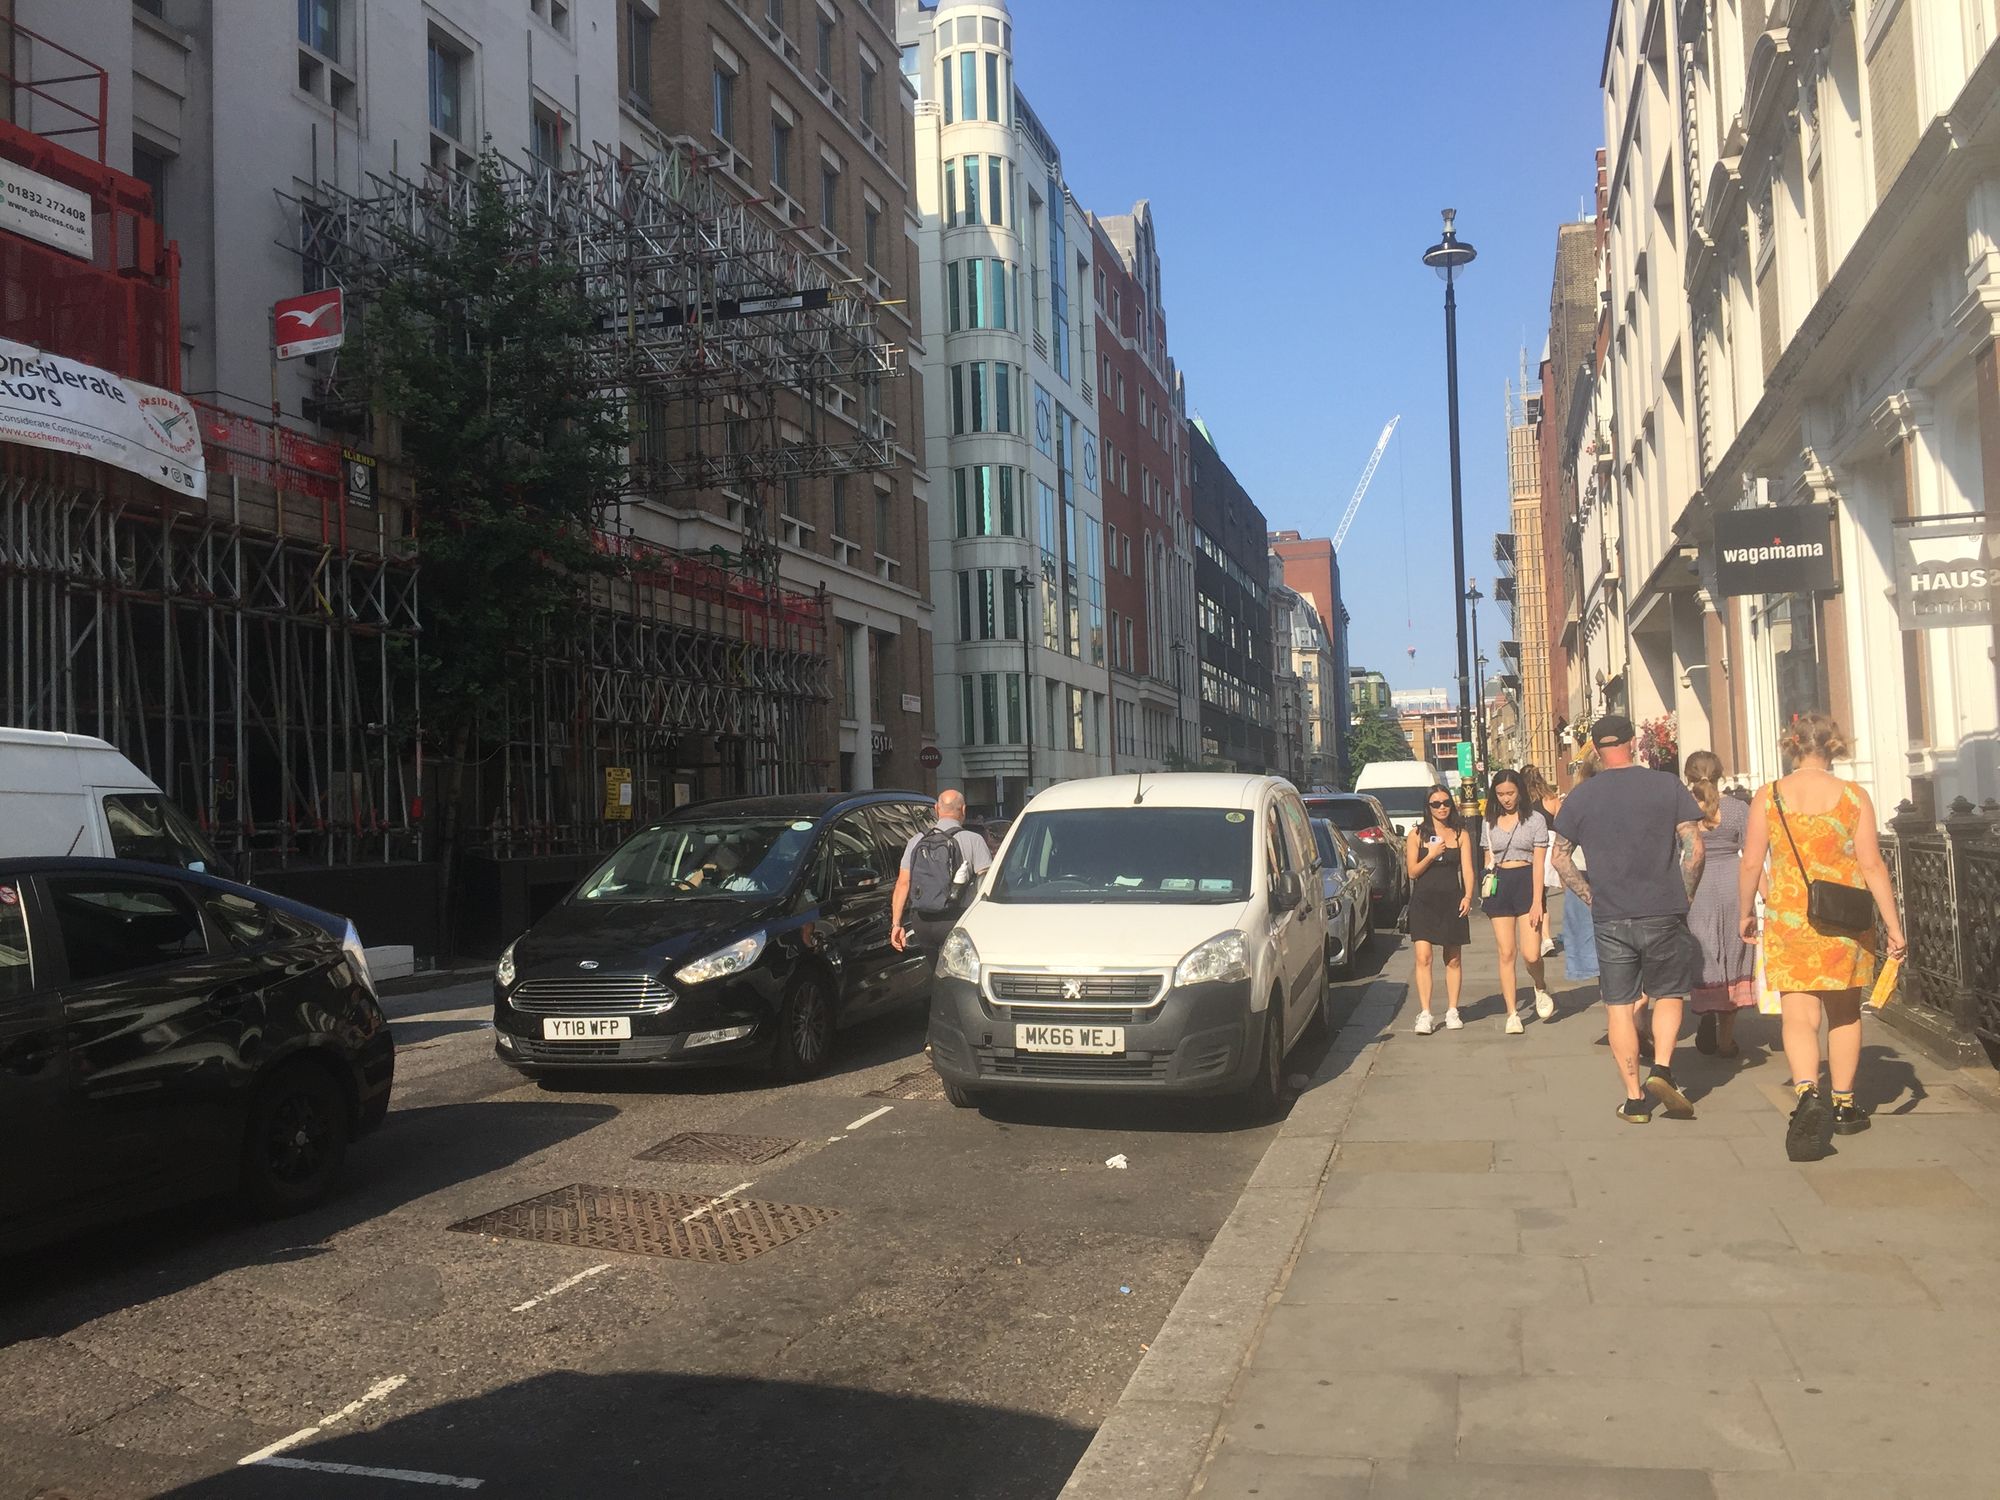 People walking and lots of vehicles on Great Malborough St, Soho